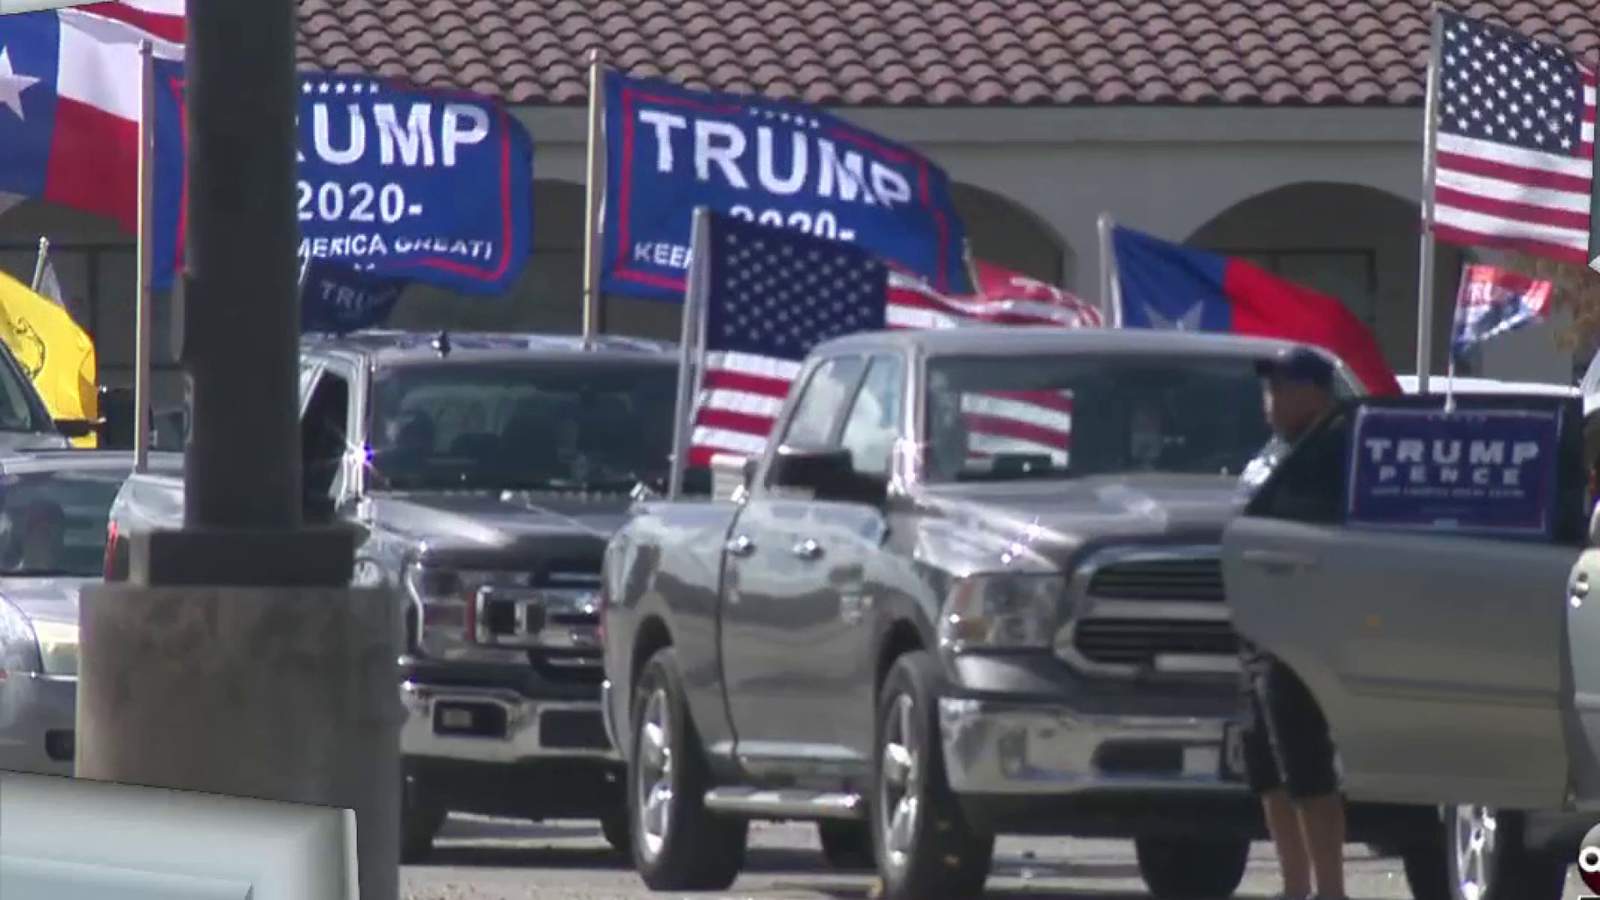 'It’s not over yet’: Trump supporters around San Antonio express doubt over outcome of 2020 election